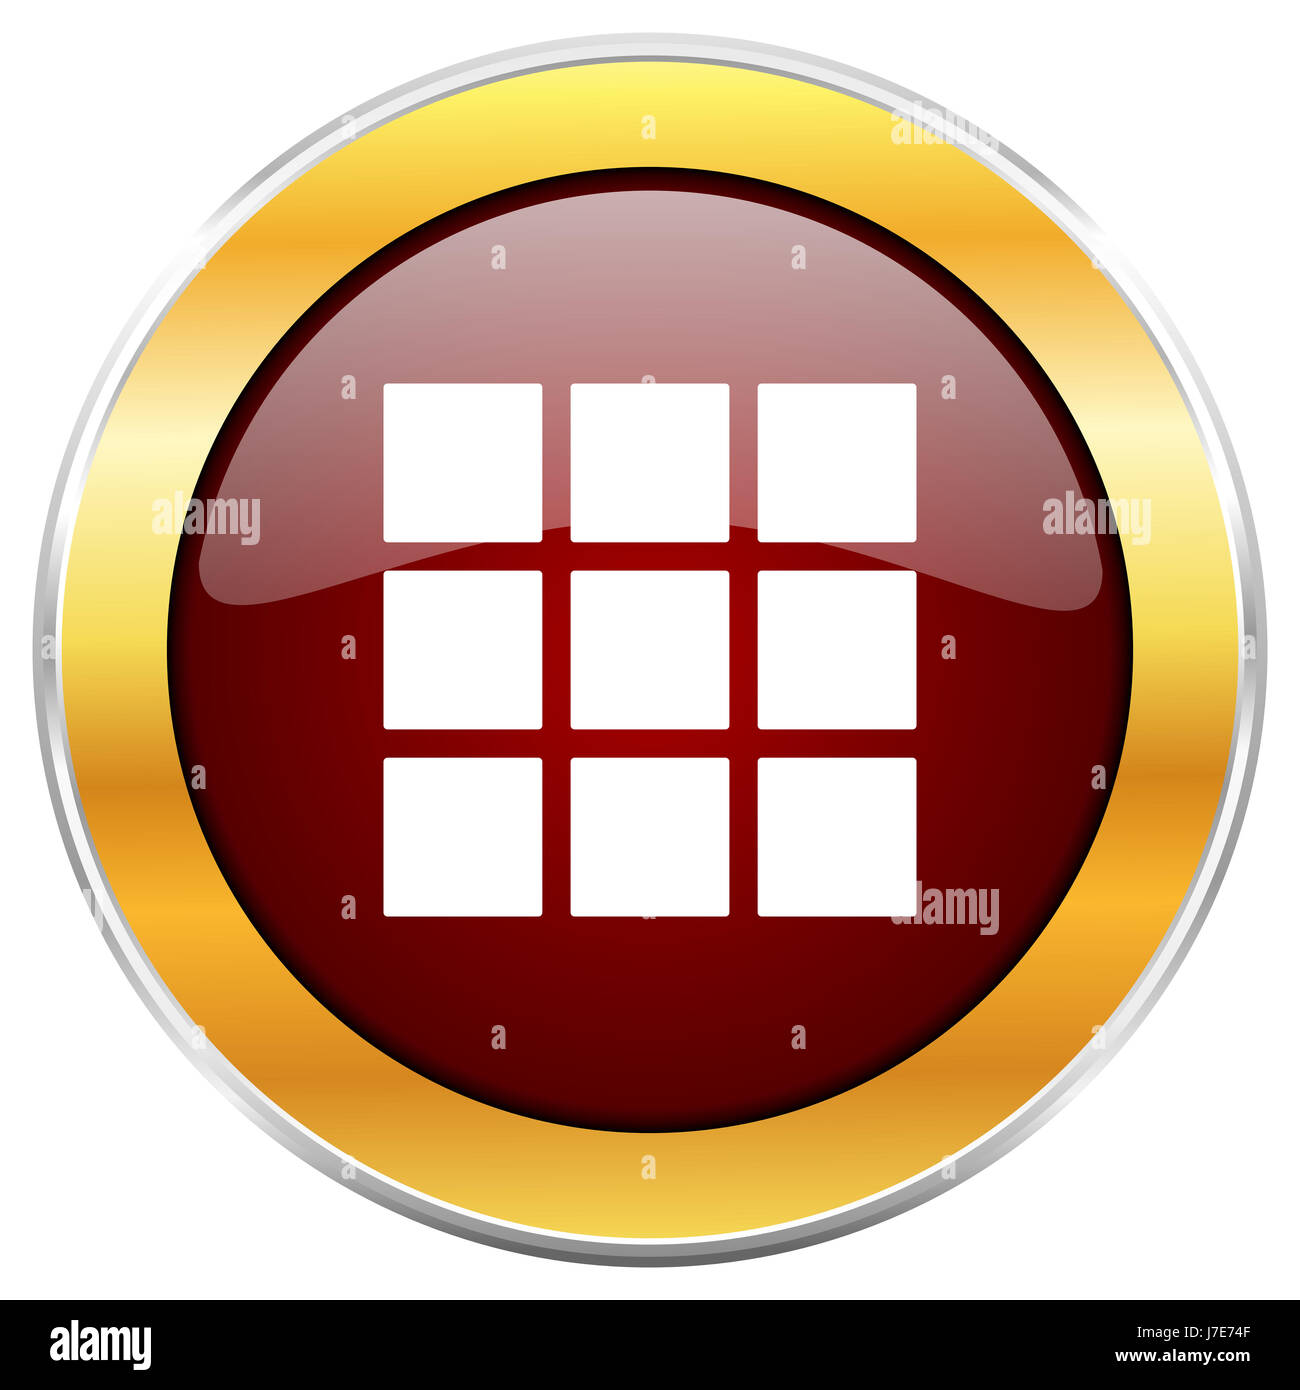 Thumbnails grid red web icon with golden border isolated on white background. Round glossy button. Stock Photo